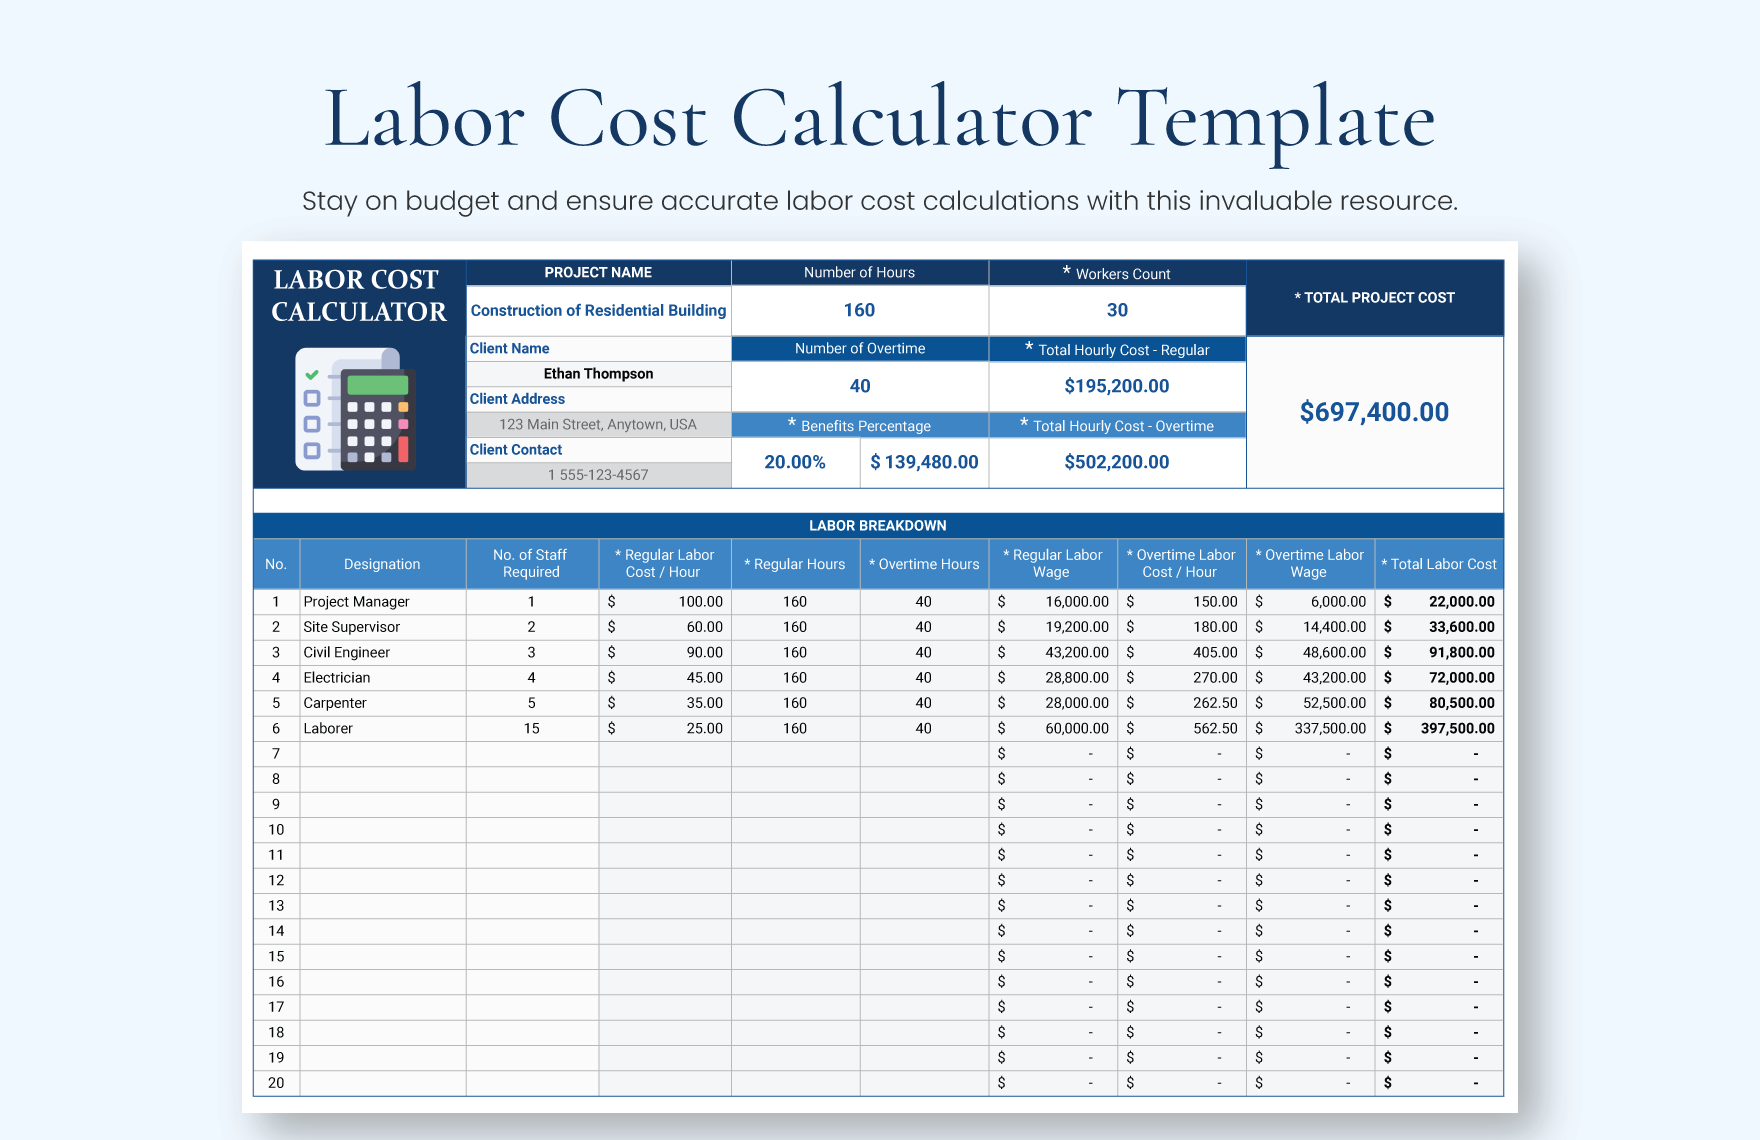 Labor Cost Calculator Template Download in Excel, Google Sheets